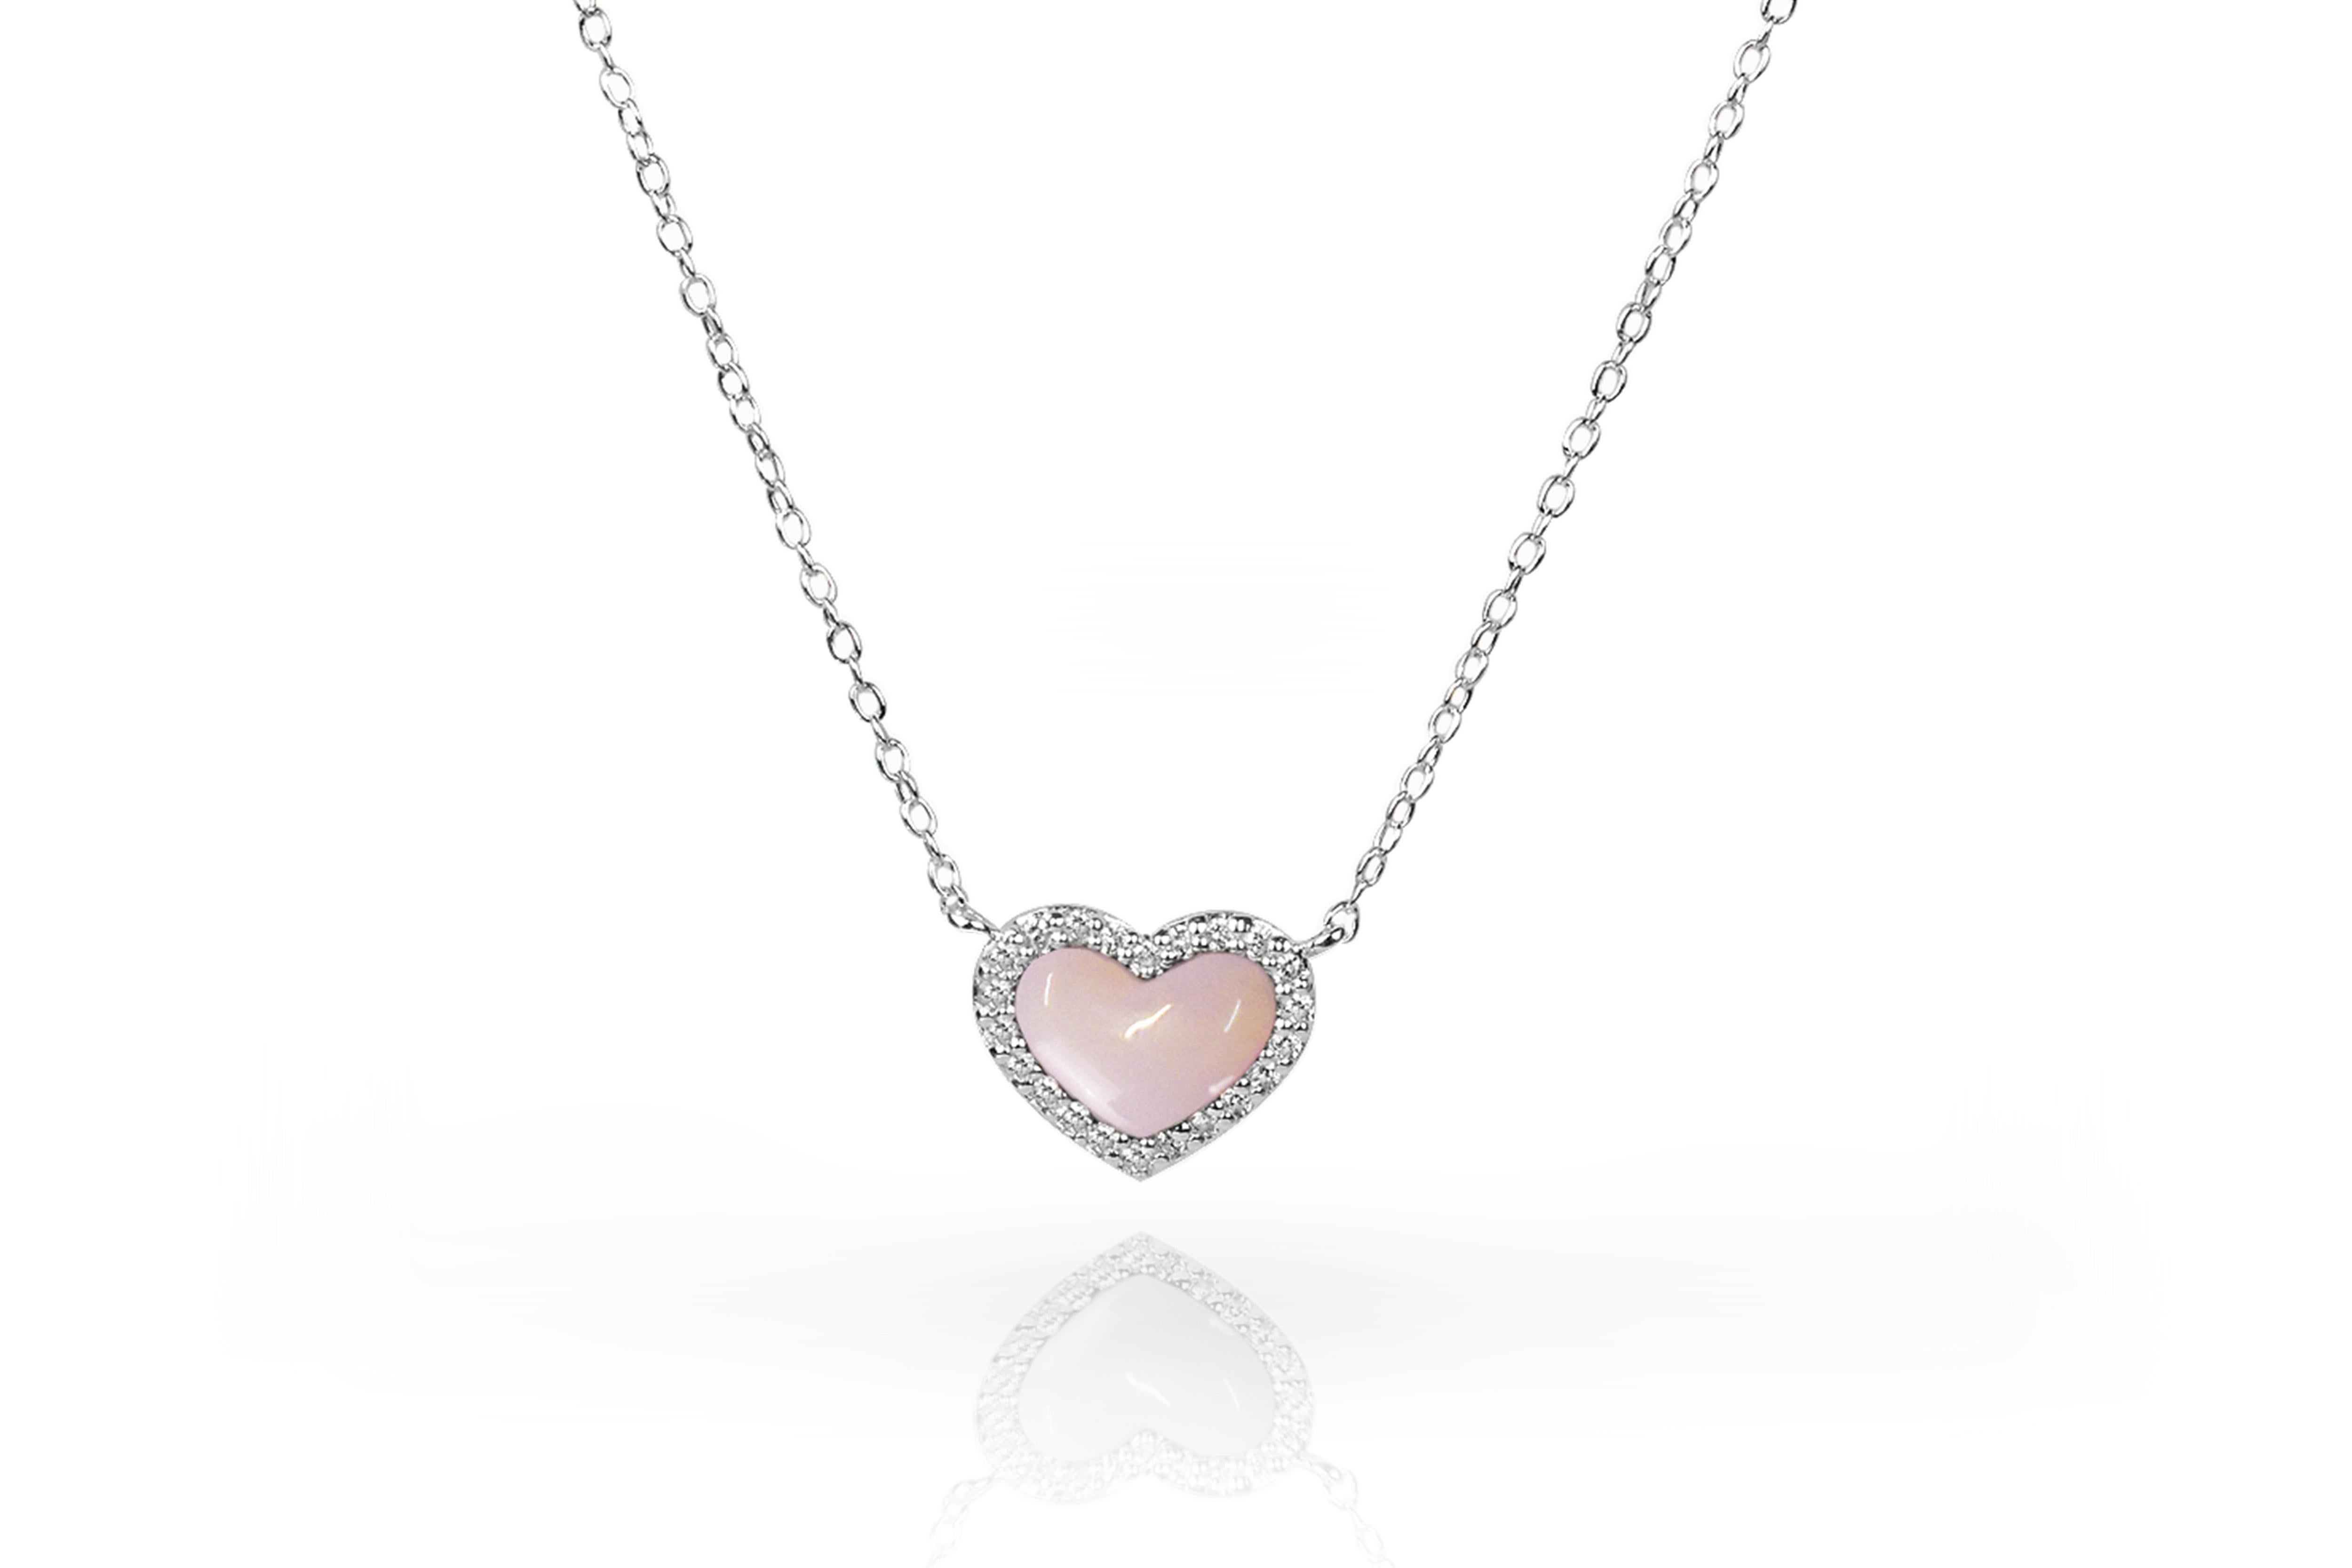 Gemstone Heart Necklace 8.78 mm. x 11.08 mm. is made of 14k solid gold available in three colors of gold and four options of gemstone.
Gold: White Gold / Rose Gold / Yellow Gold.
Gemstone: Abalone / Tahitian Black MOP / White MOP / Pink